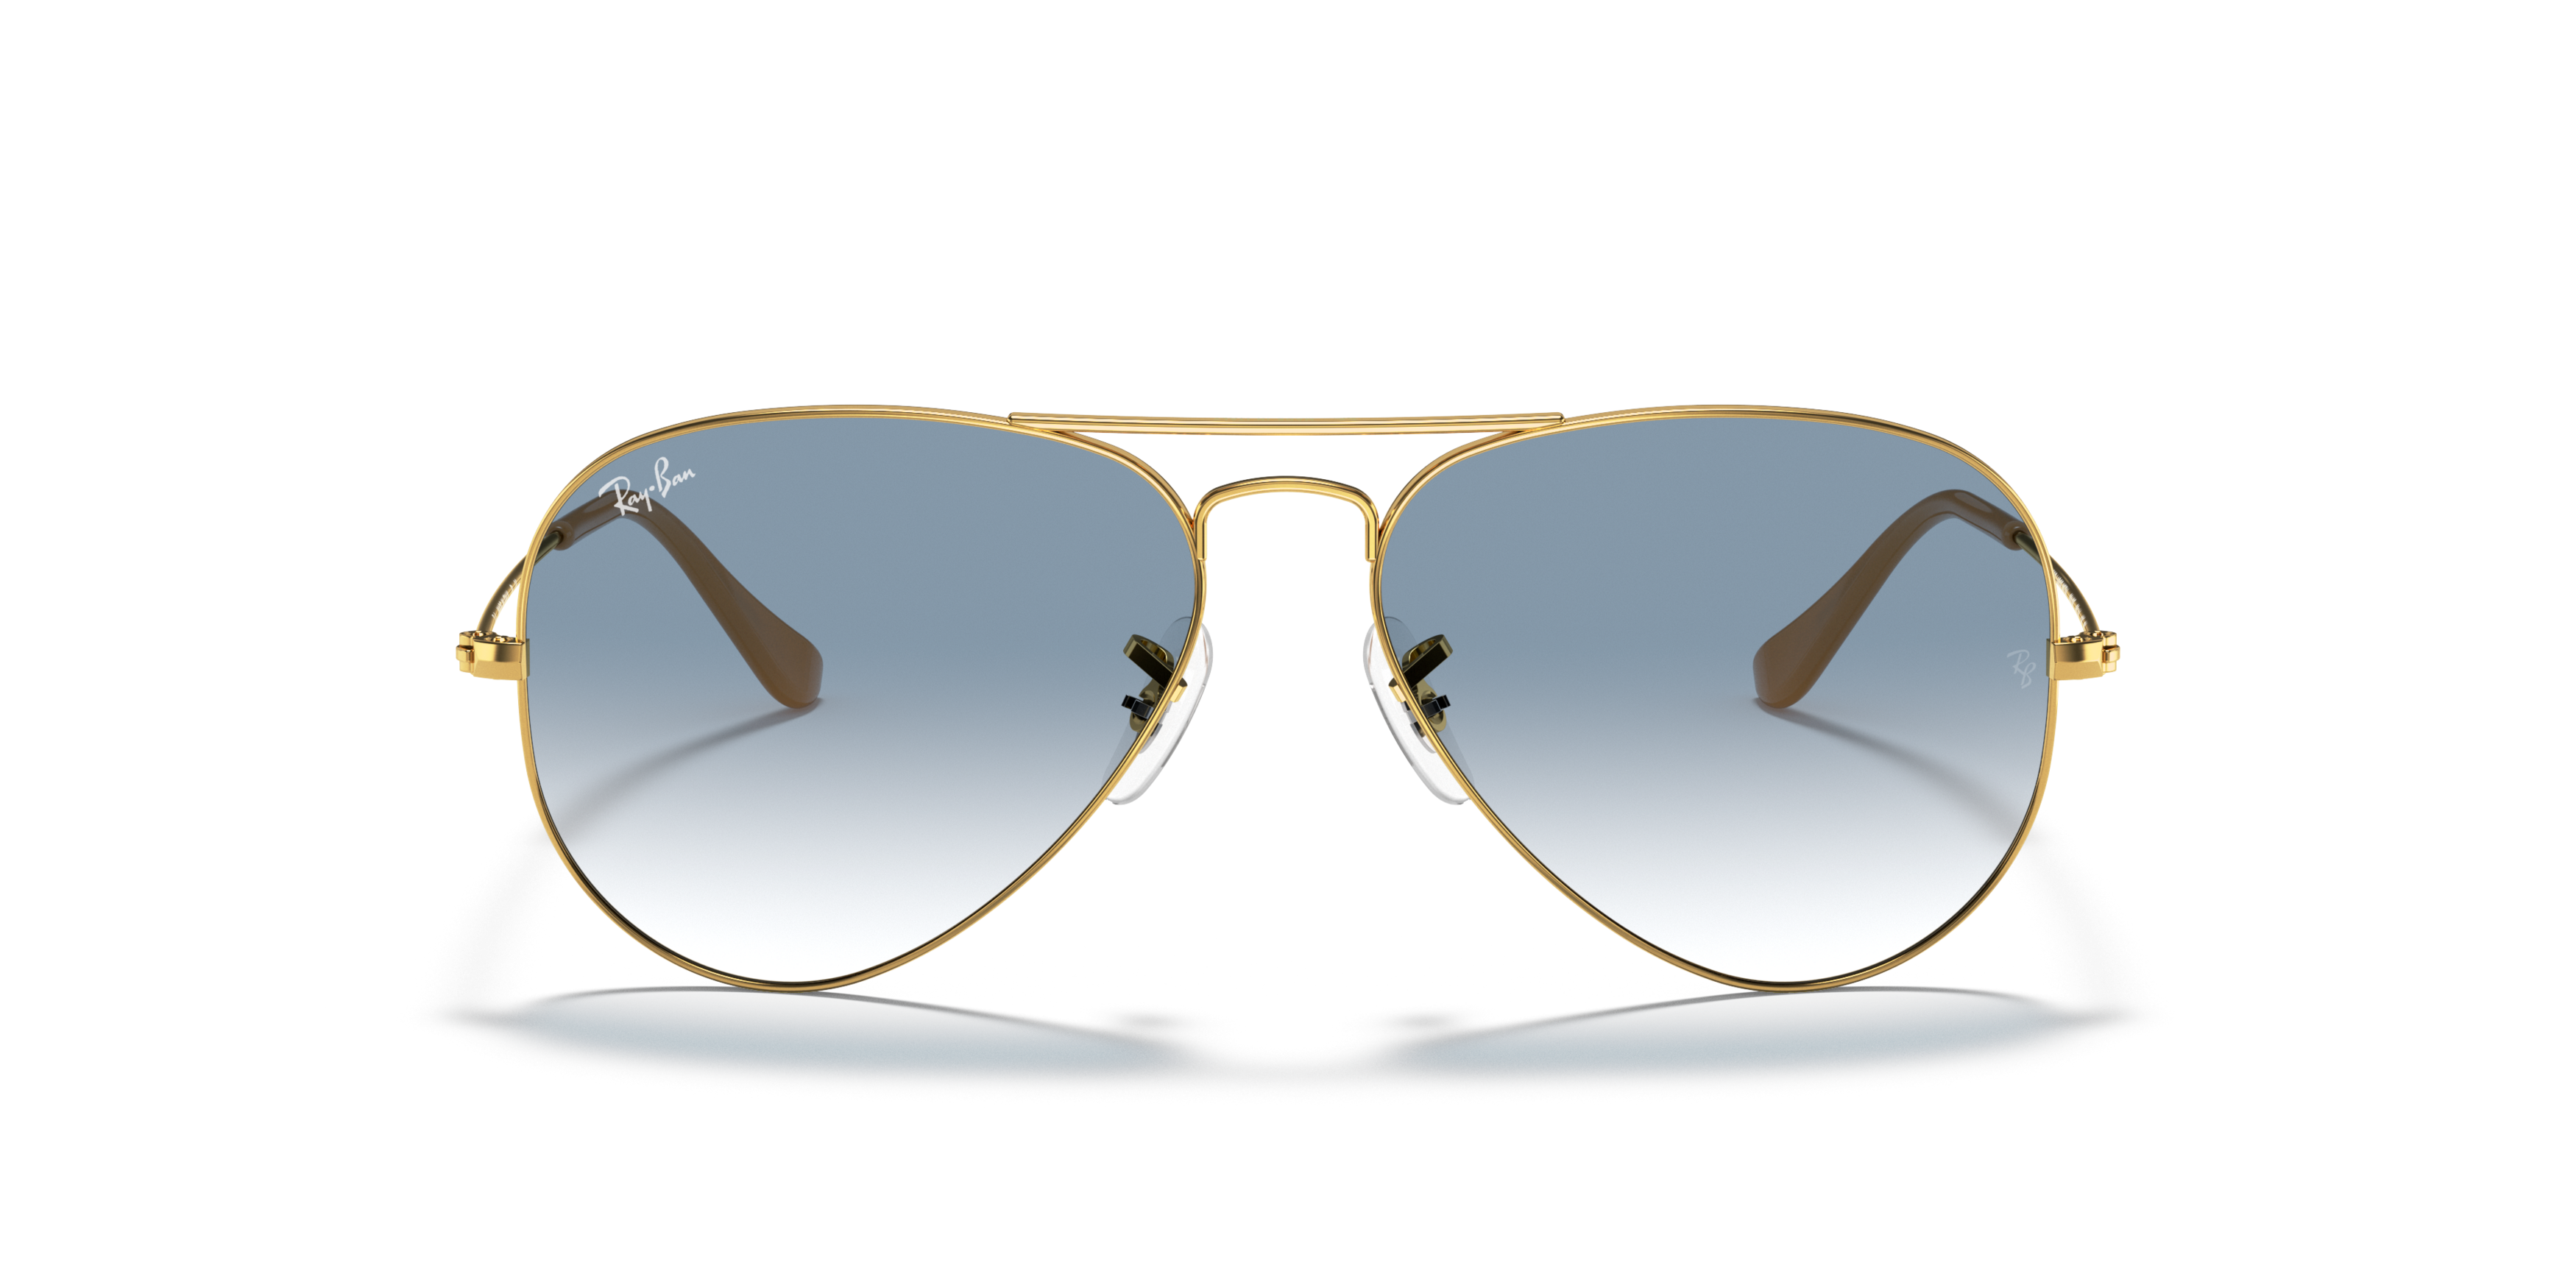 [products.image.front] Ray-Ban Aviator Gradient RB3025 001/3F